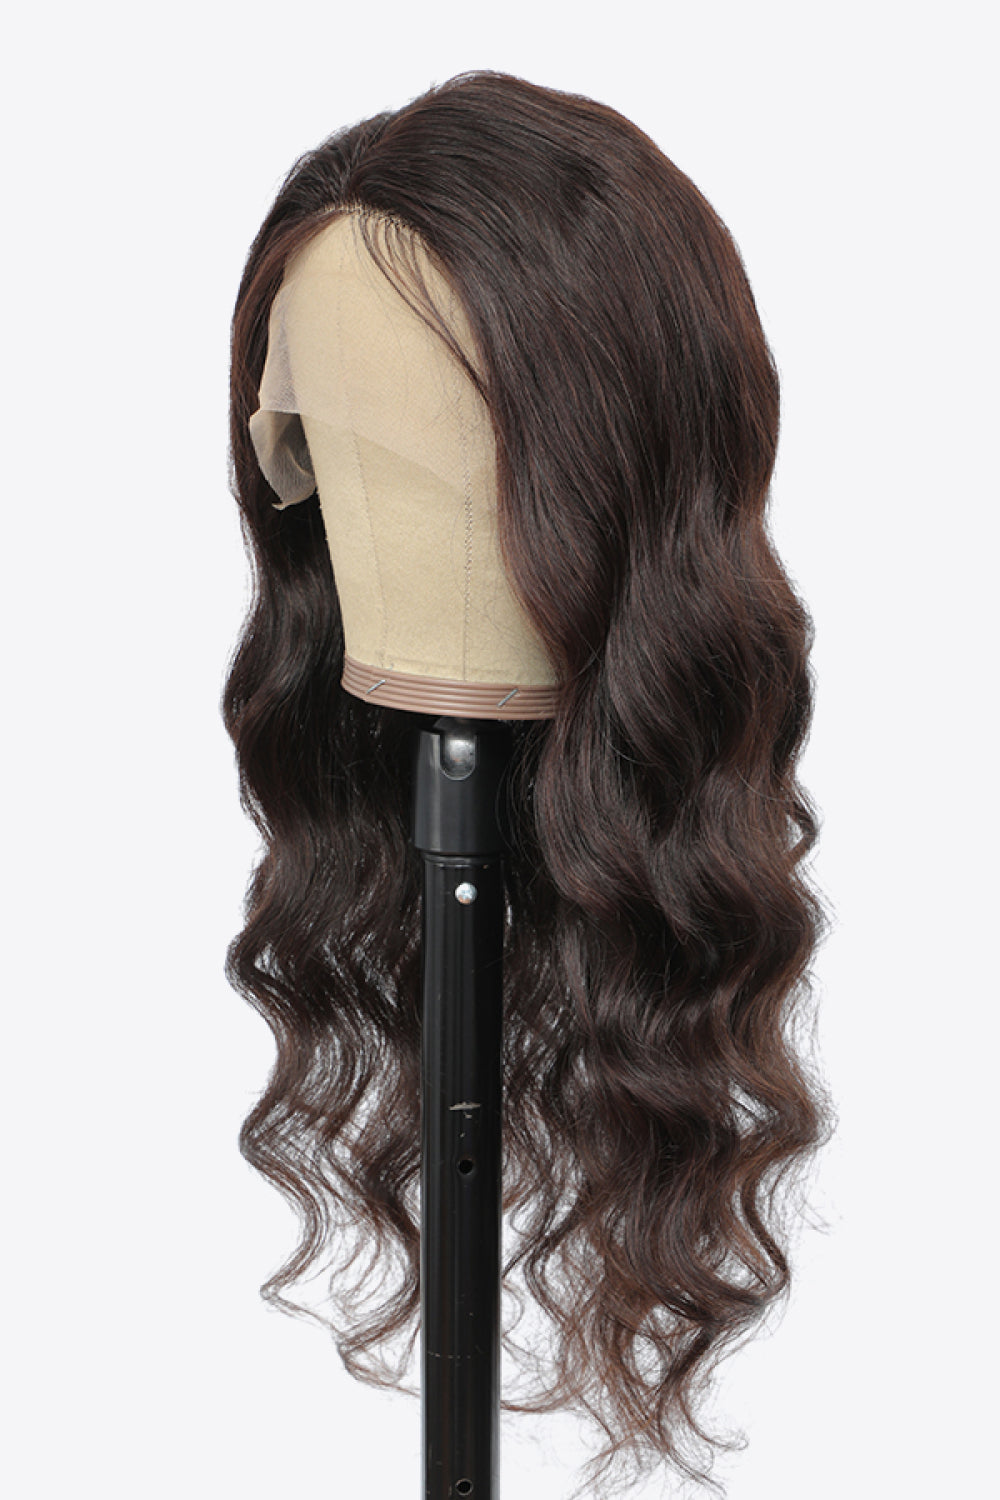 20" 13x4 Lace Front Wigs Body Wave Human Virgin Hair Natural Color 150% Density by TC